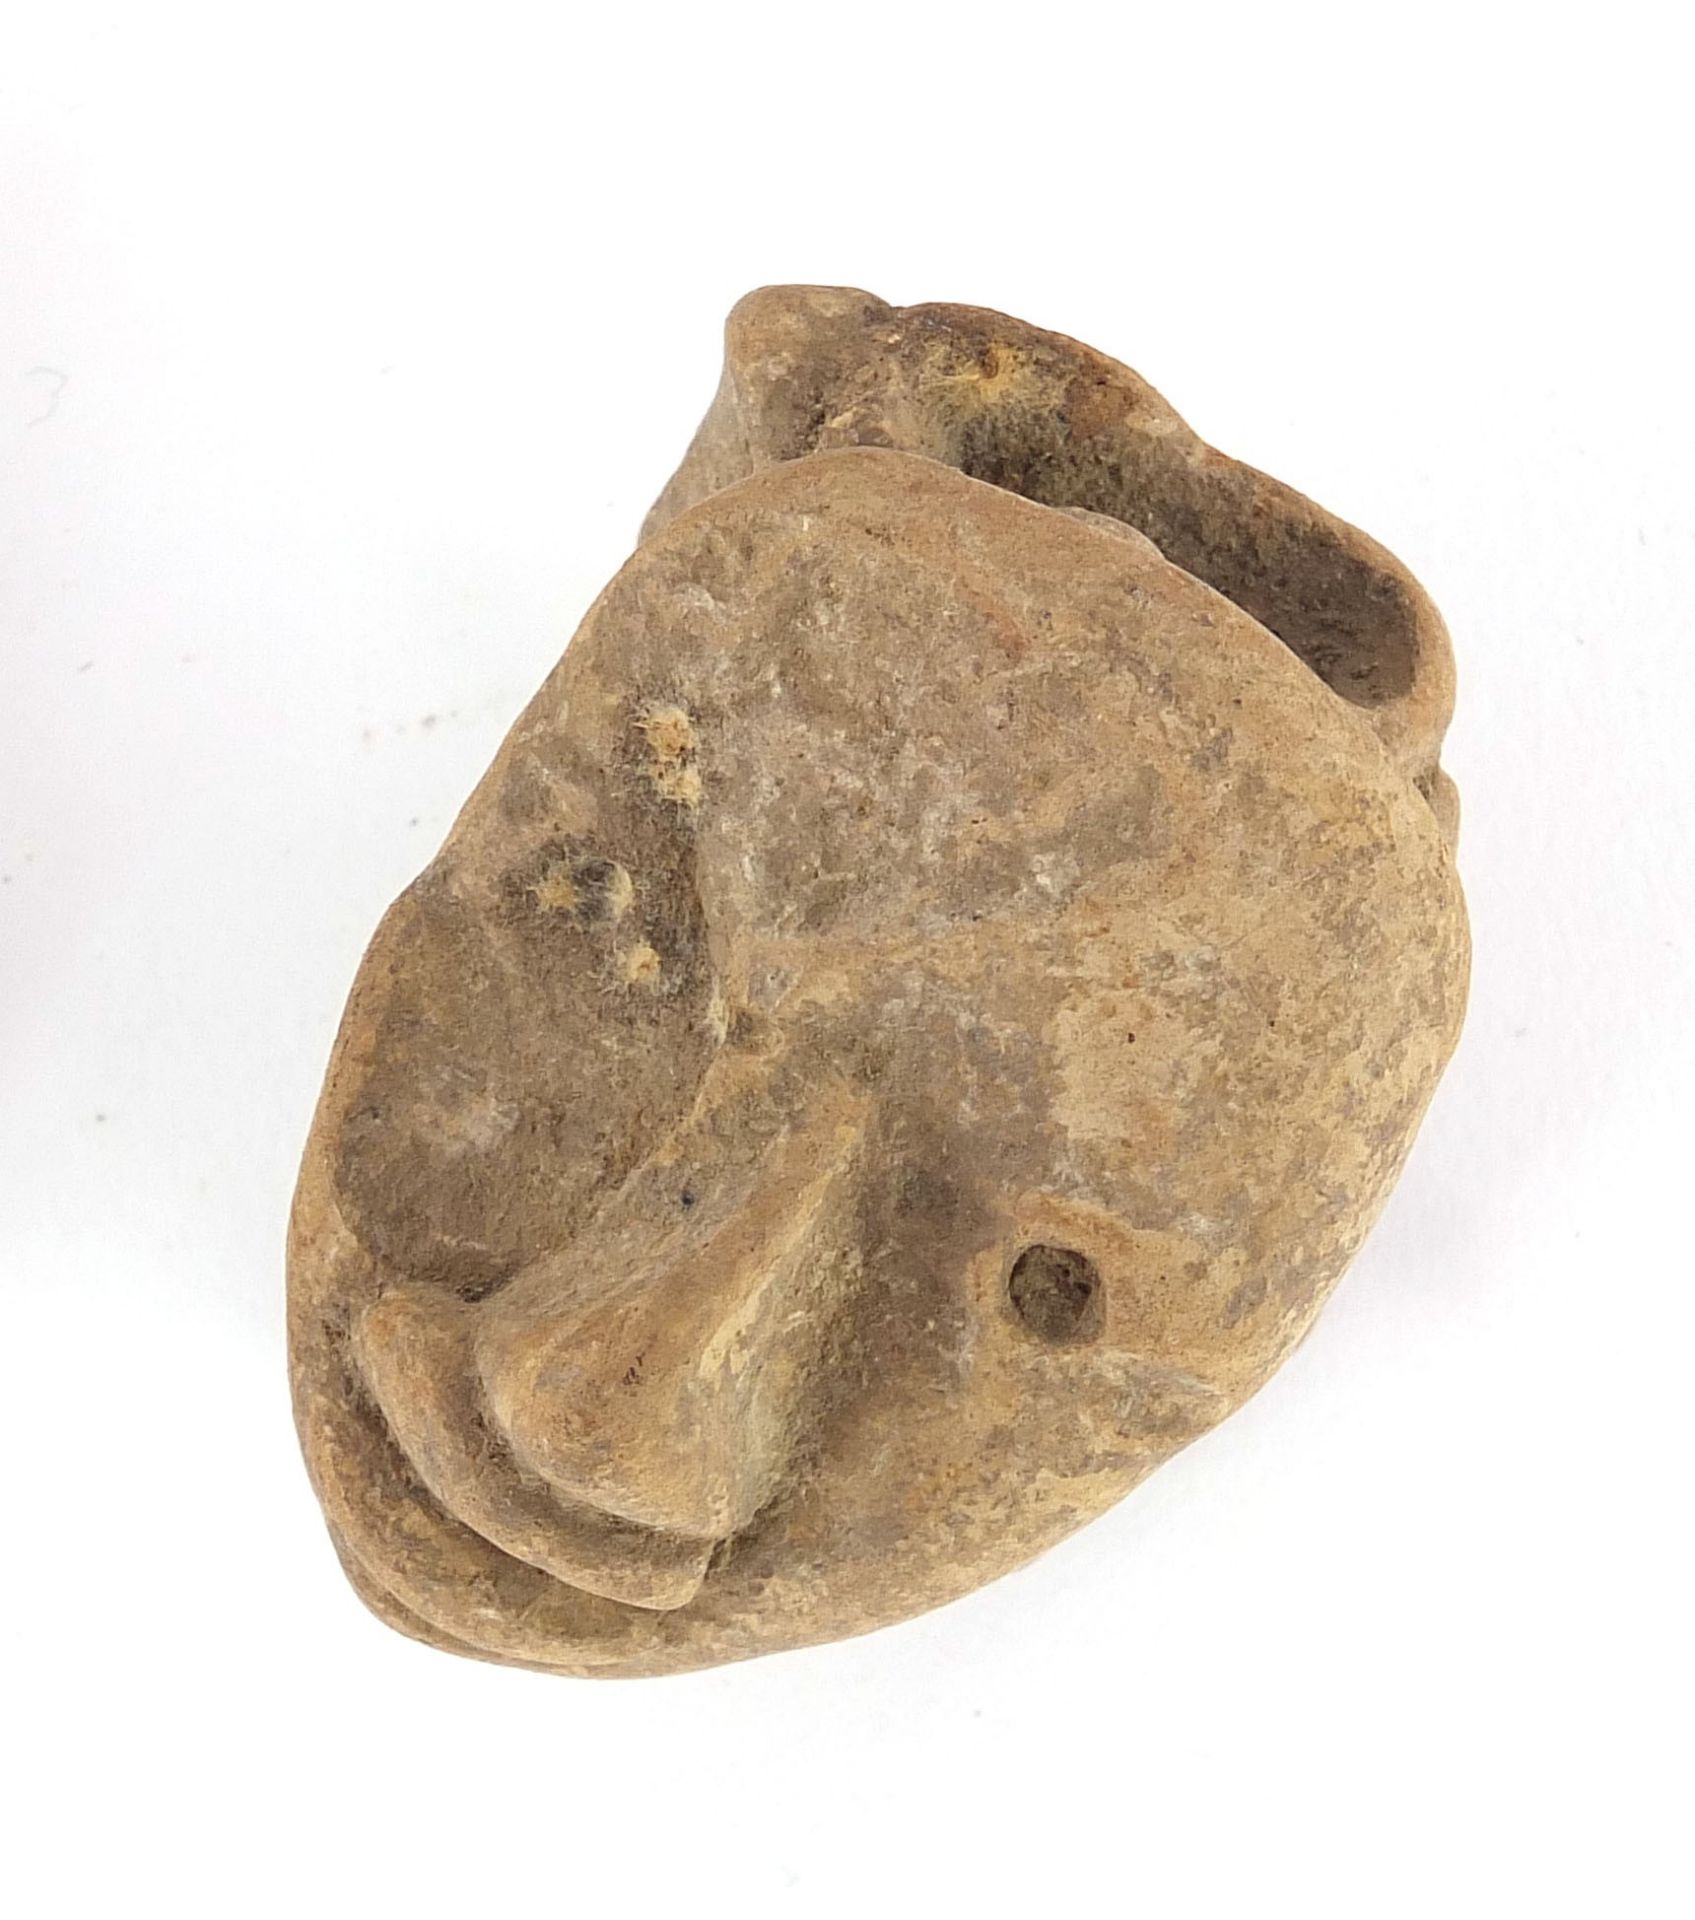 Stone antiquities including a marble carving of a bird and stone fragments, the largest 13cm high - Image 11 of 13